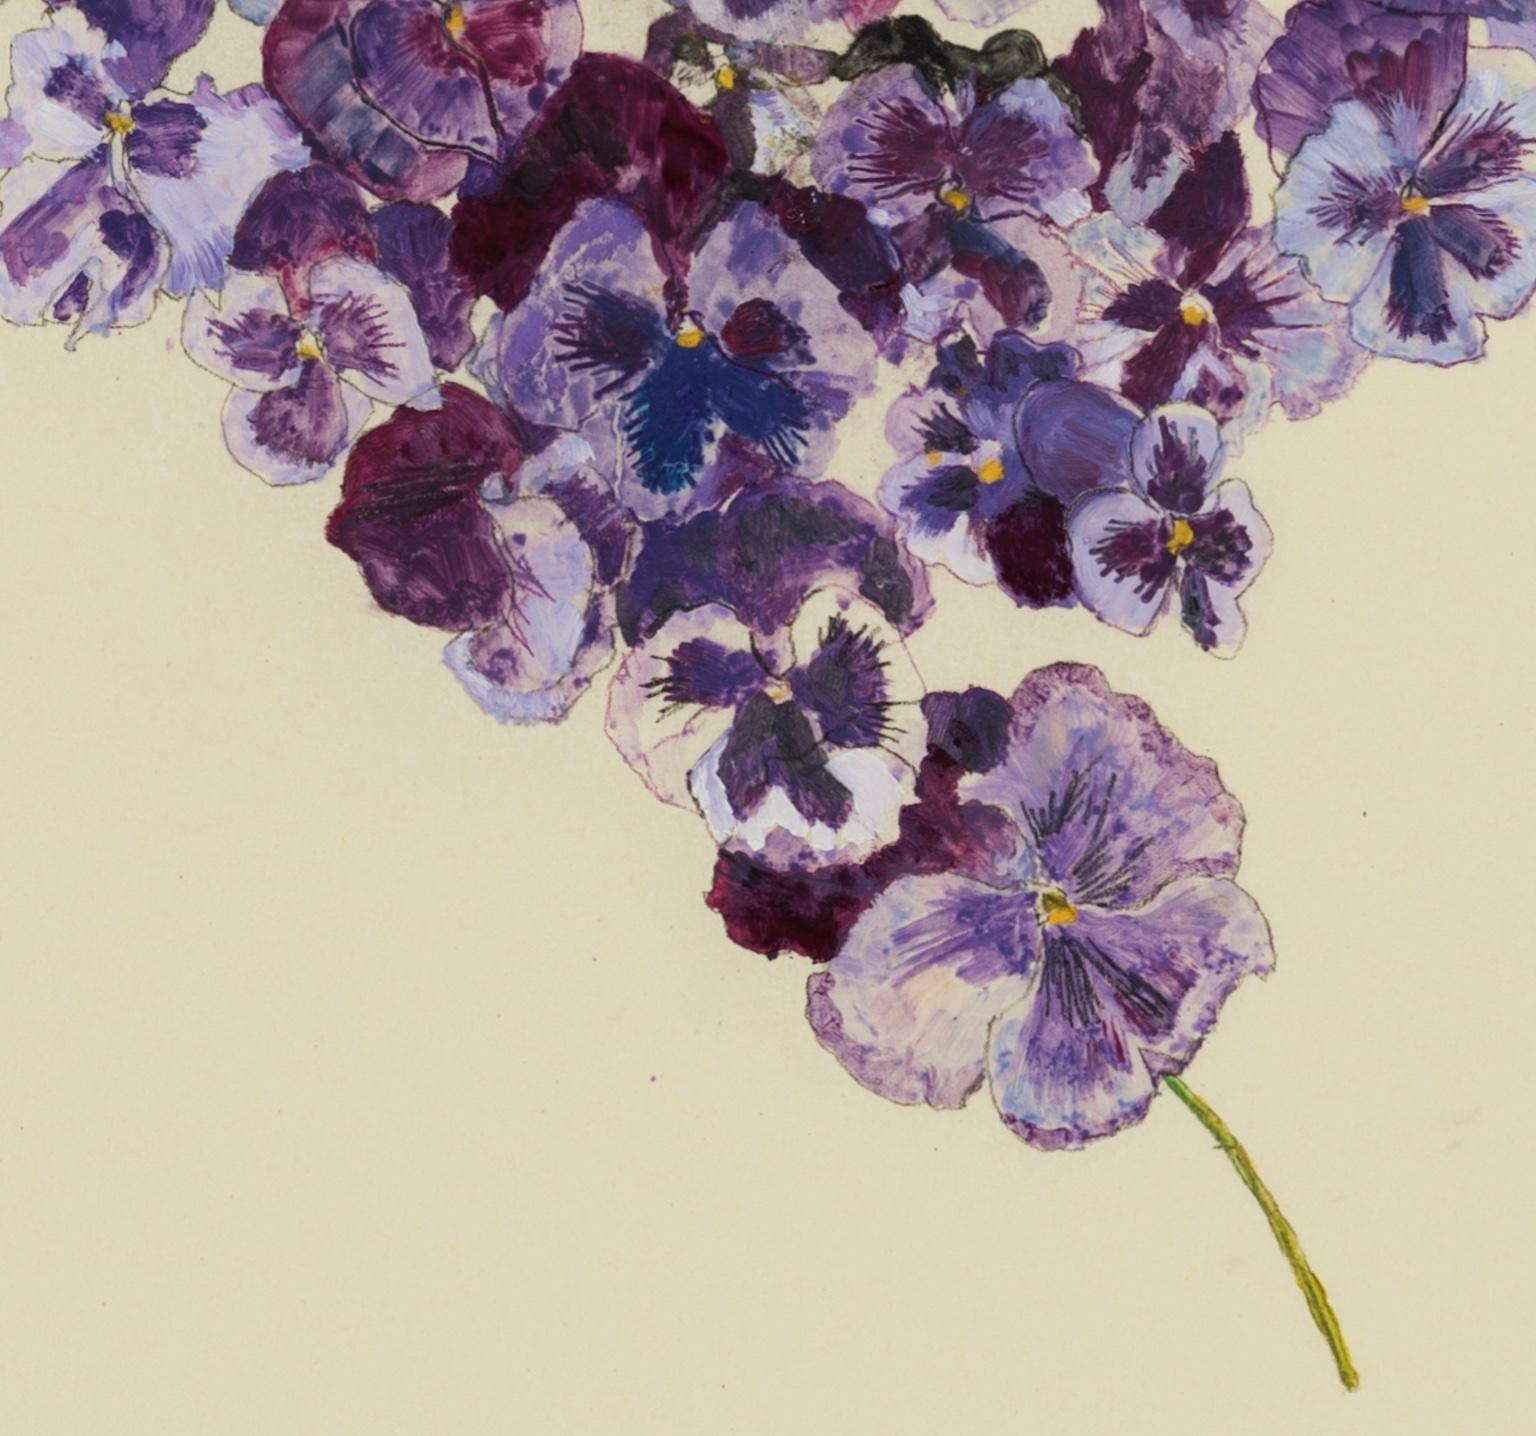 Purple Pansy Square, Mixed media on Pergamenata parchment - Contemporary Art by Howard Tangye